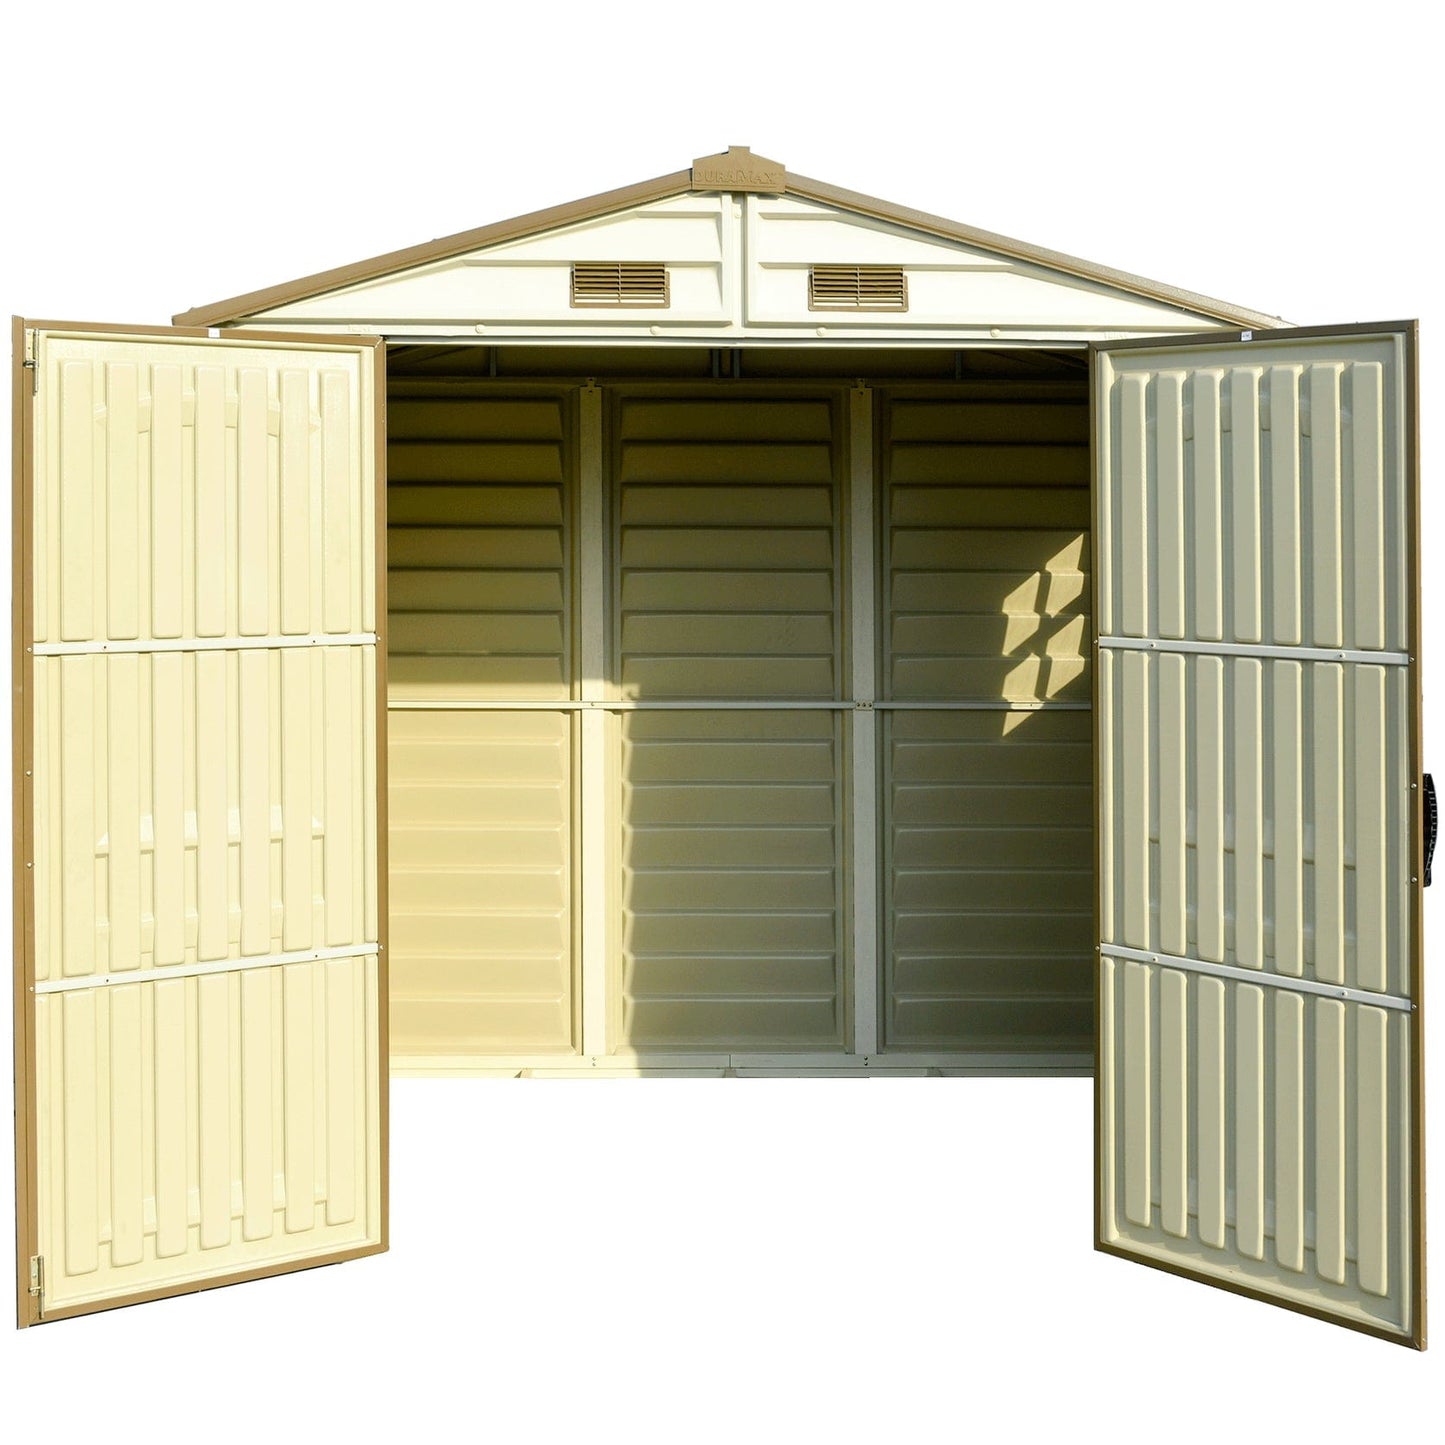 DuraMax Vinyl Shed 8x6 StoreAll with Foundation Kit